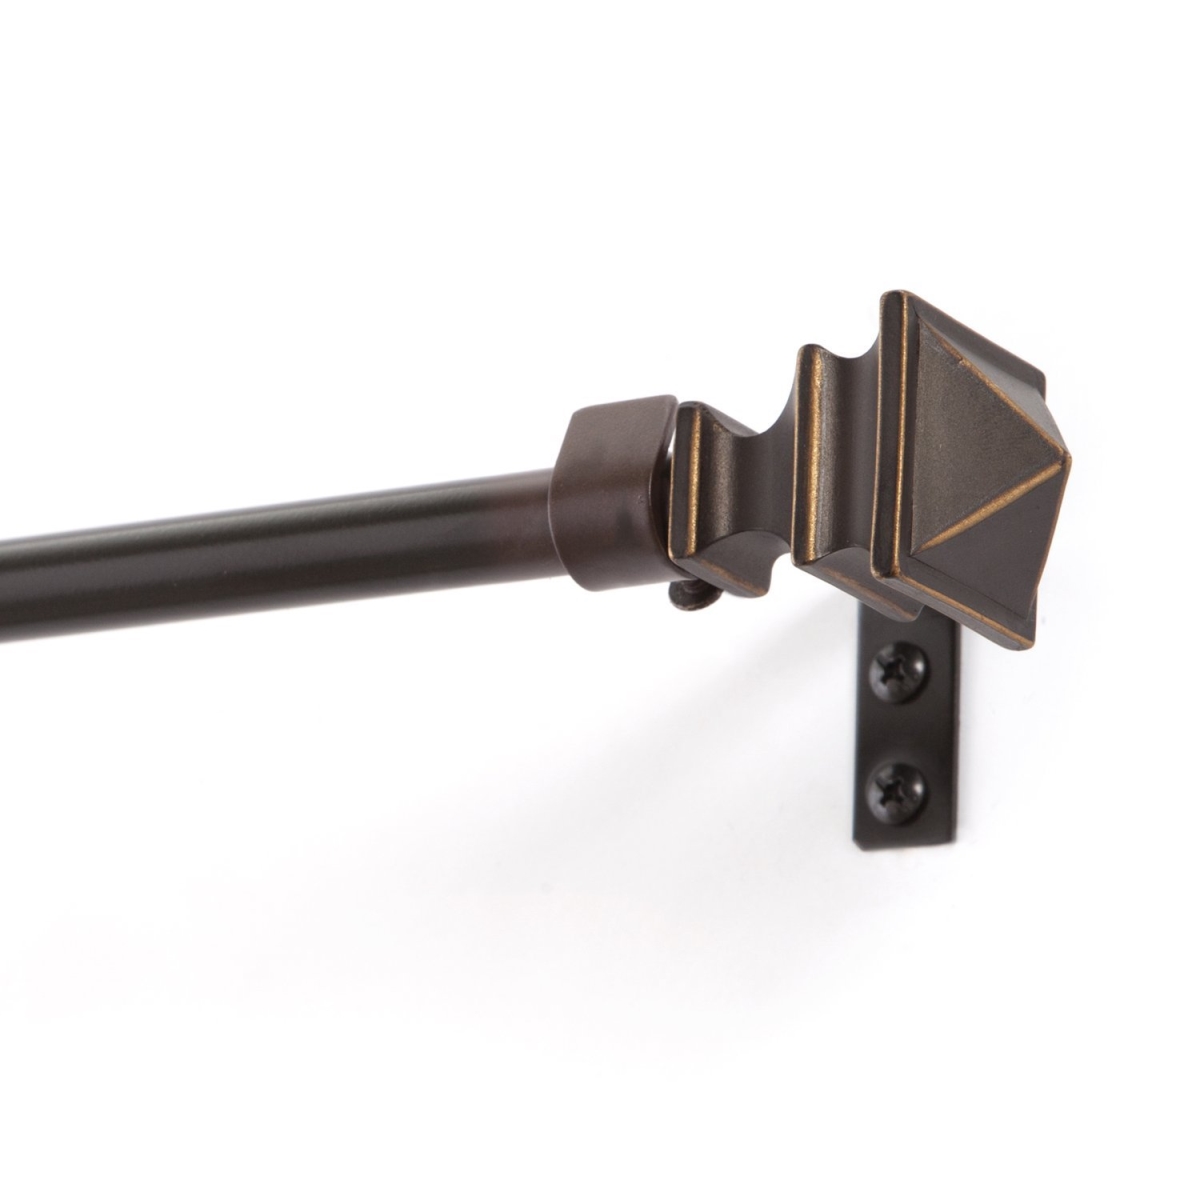 32-lwf1021-3orb 88-144 In. Painted Oil Rubbed Bronze Finish Single Rod Window Hardware With Mosaic Glass Finial